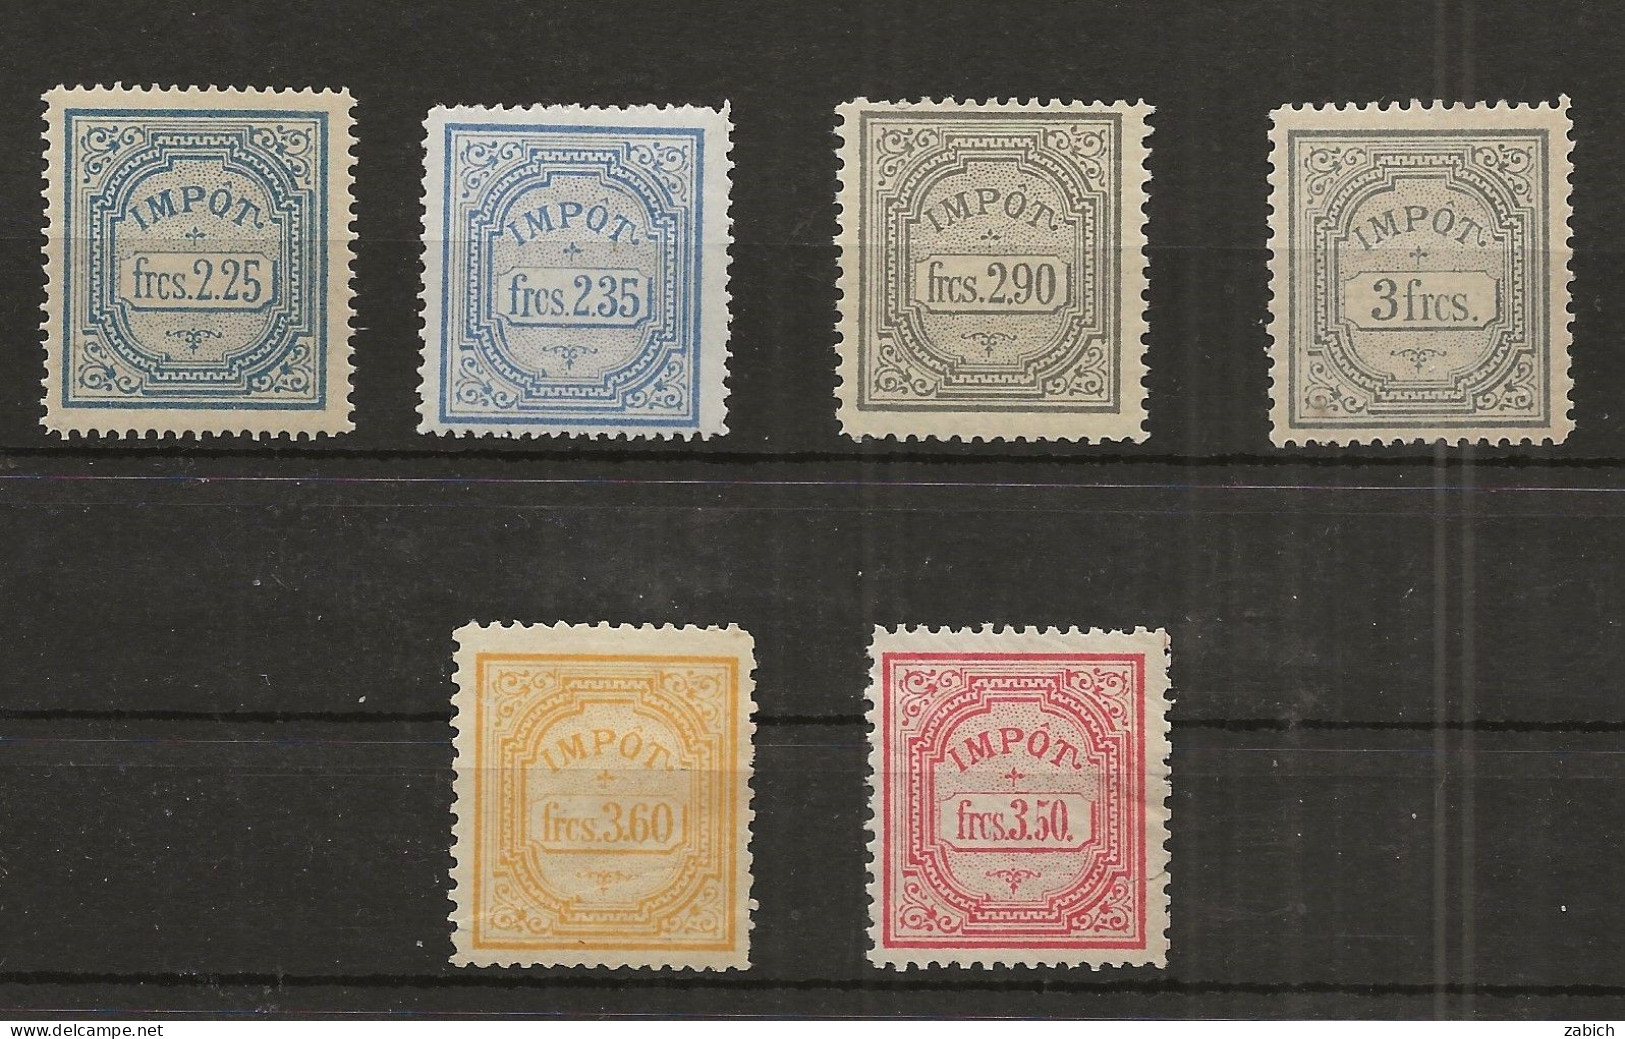 WAGONS LITS N°38, 39, 41, 42, 43, 44 Neufs (charnières) - Timbres